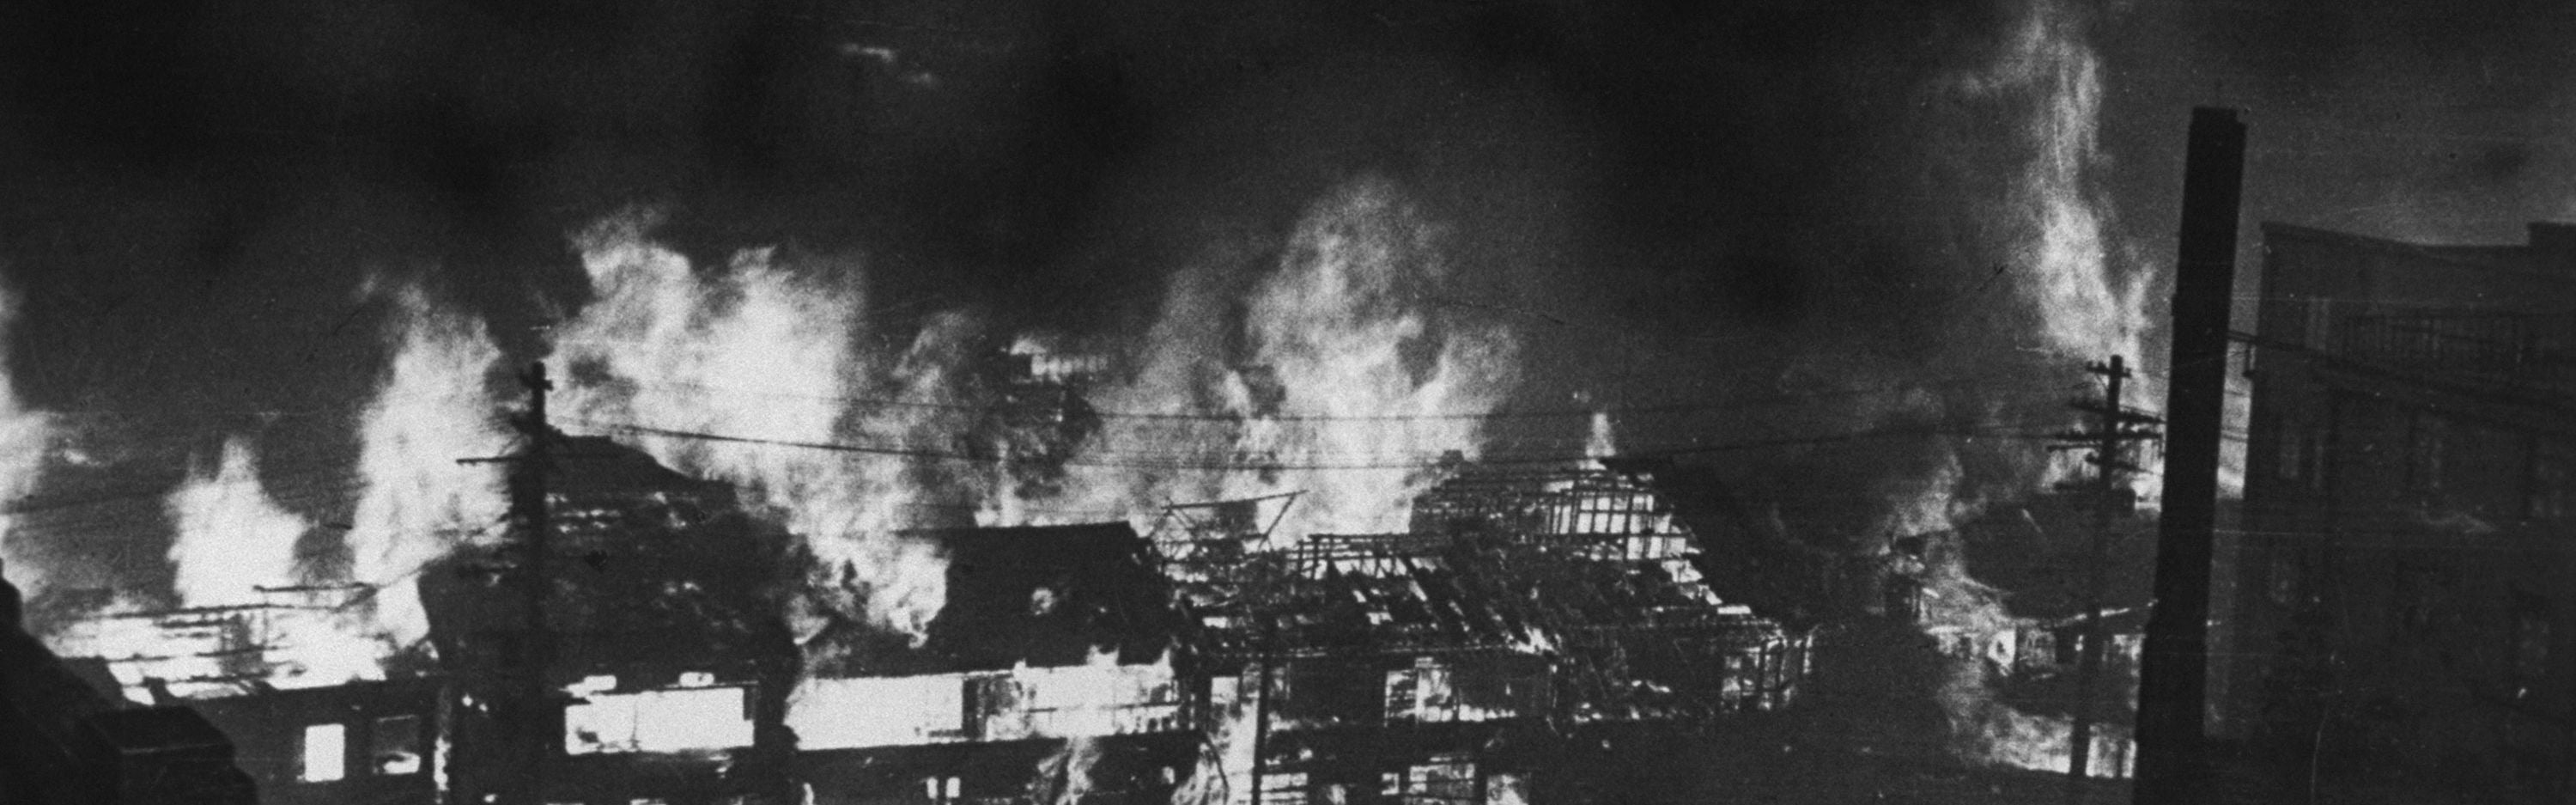 WWII Tokyo fires from bombing